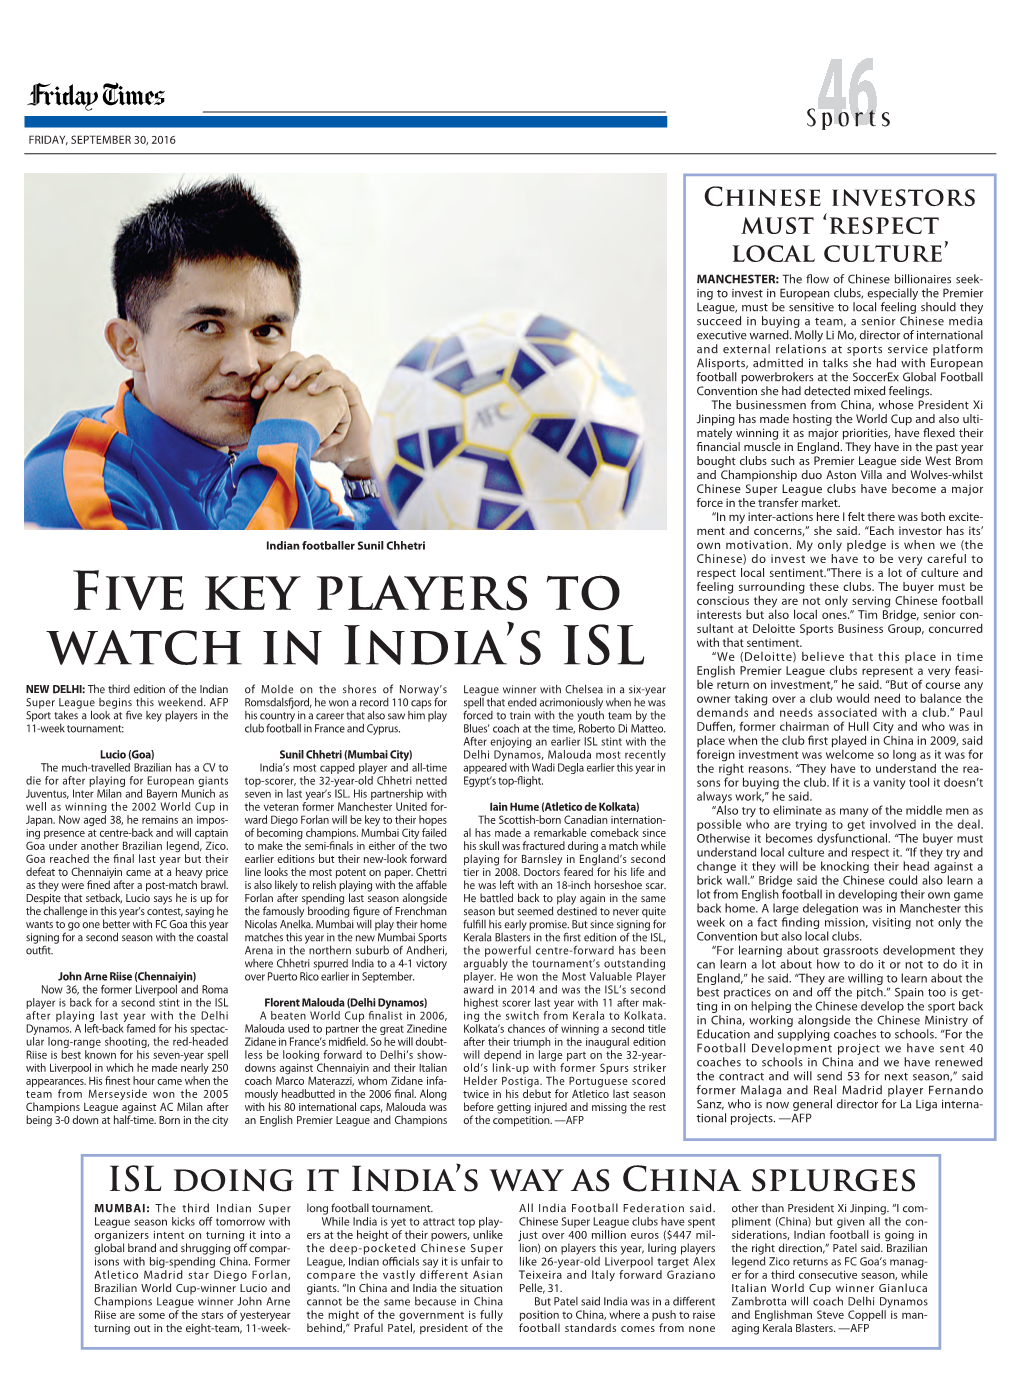 Five Key Players to Watch in India's